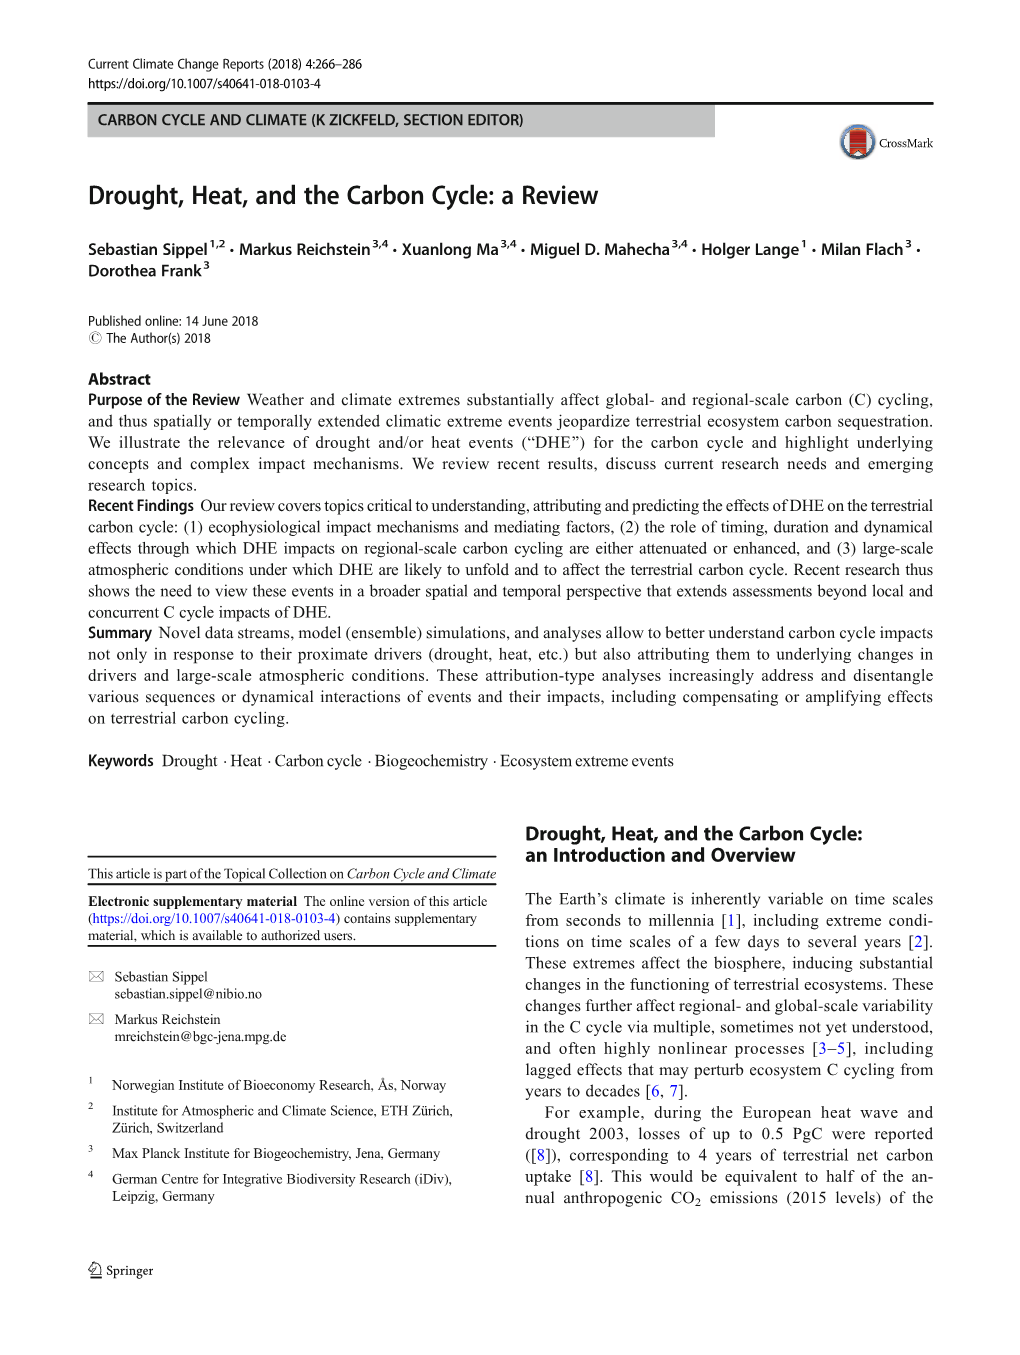 Drought, Heat, and the Carbon Cycle: a Review